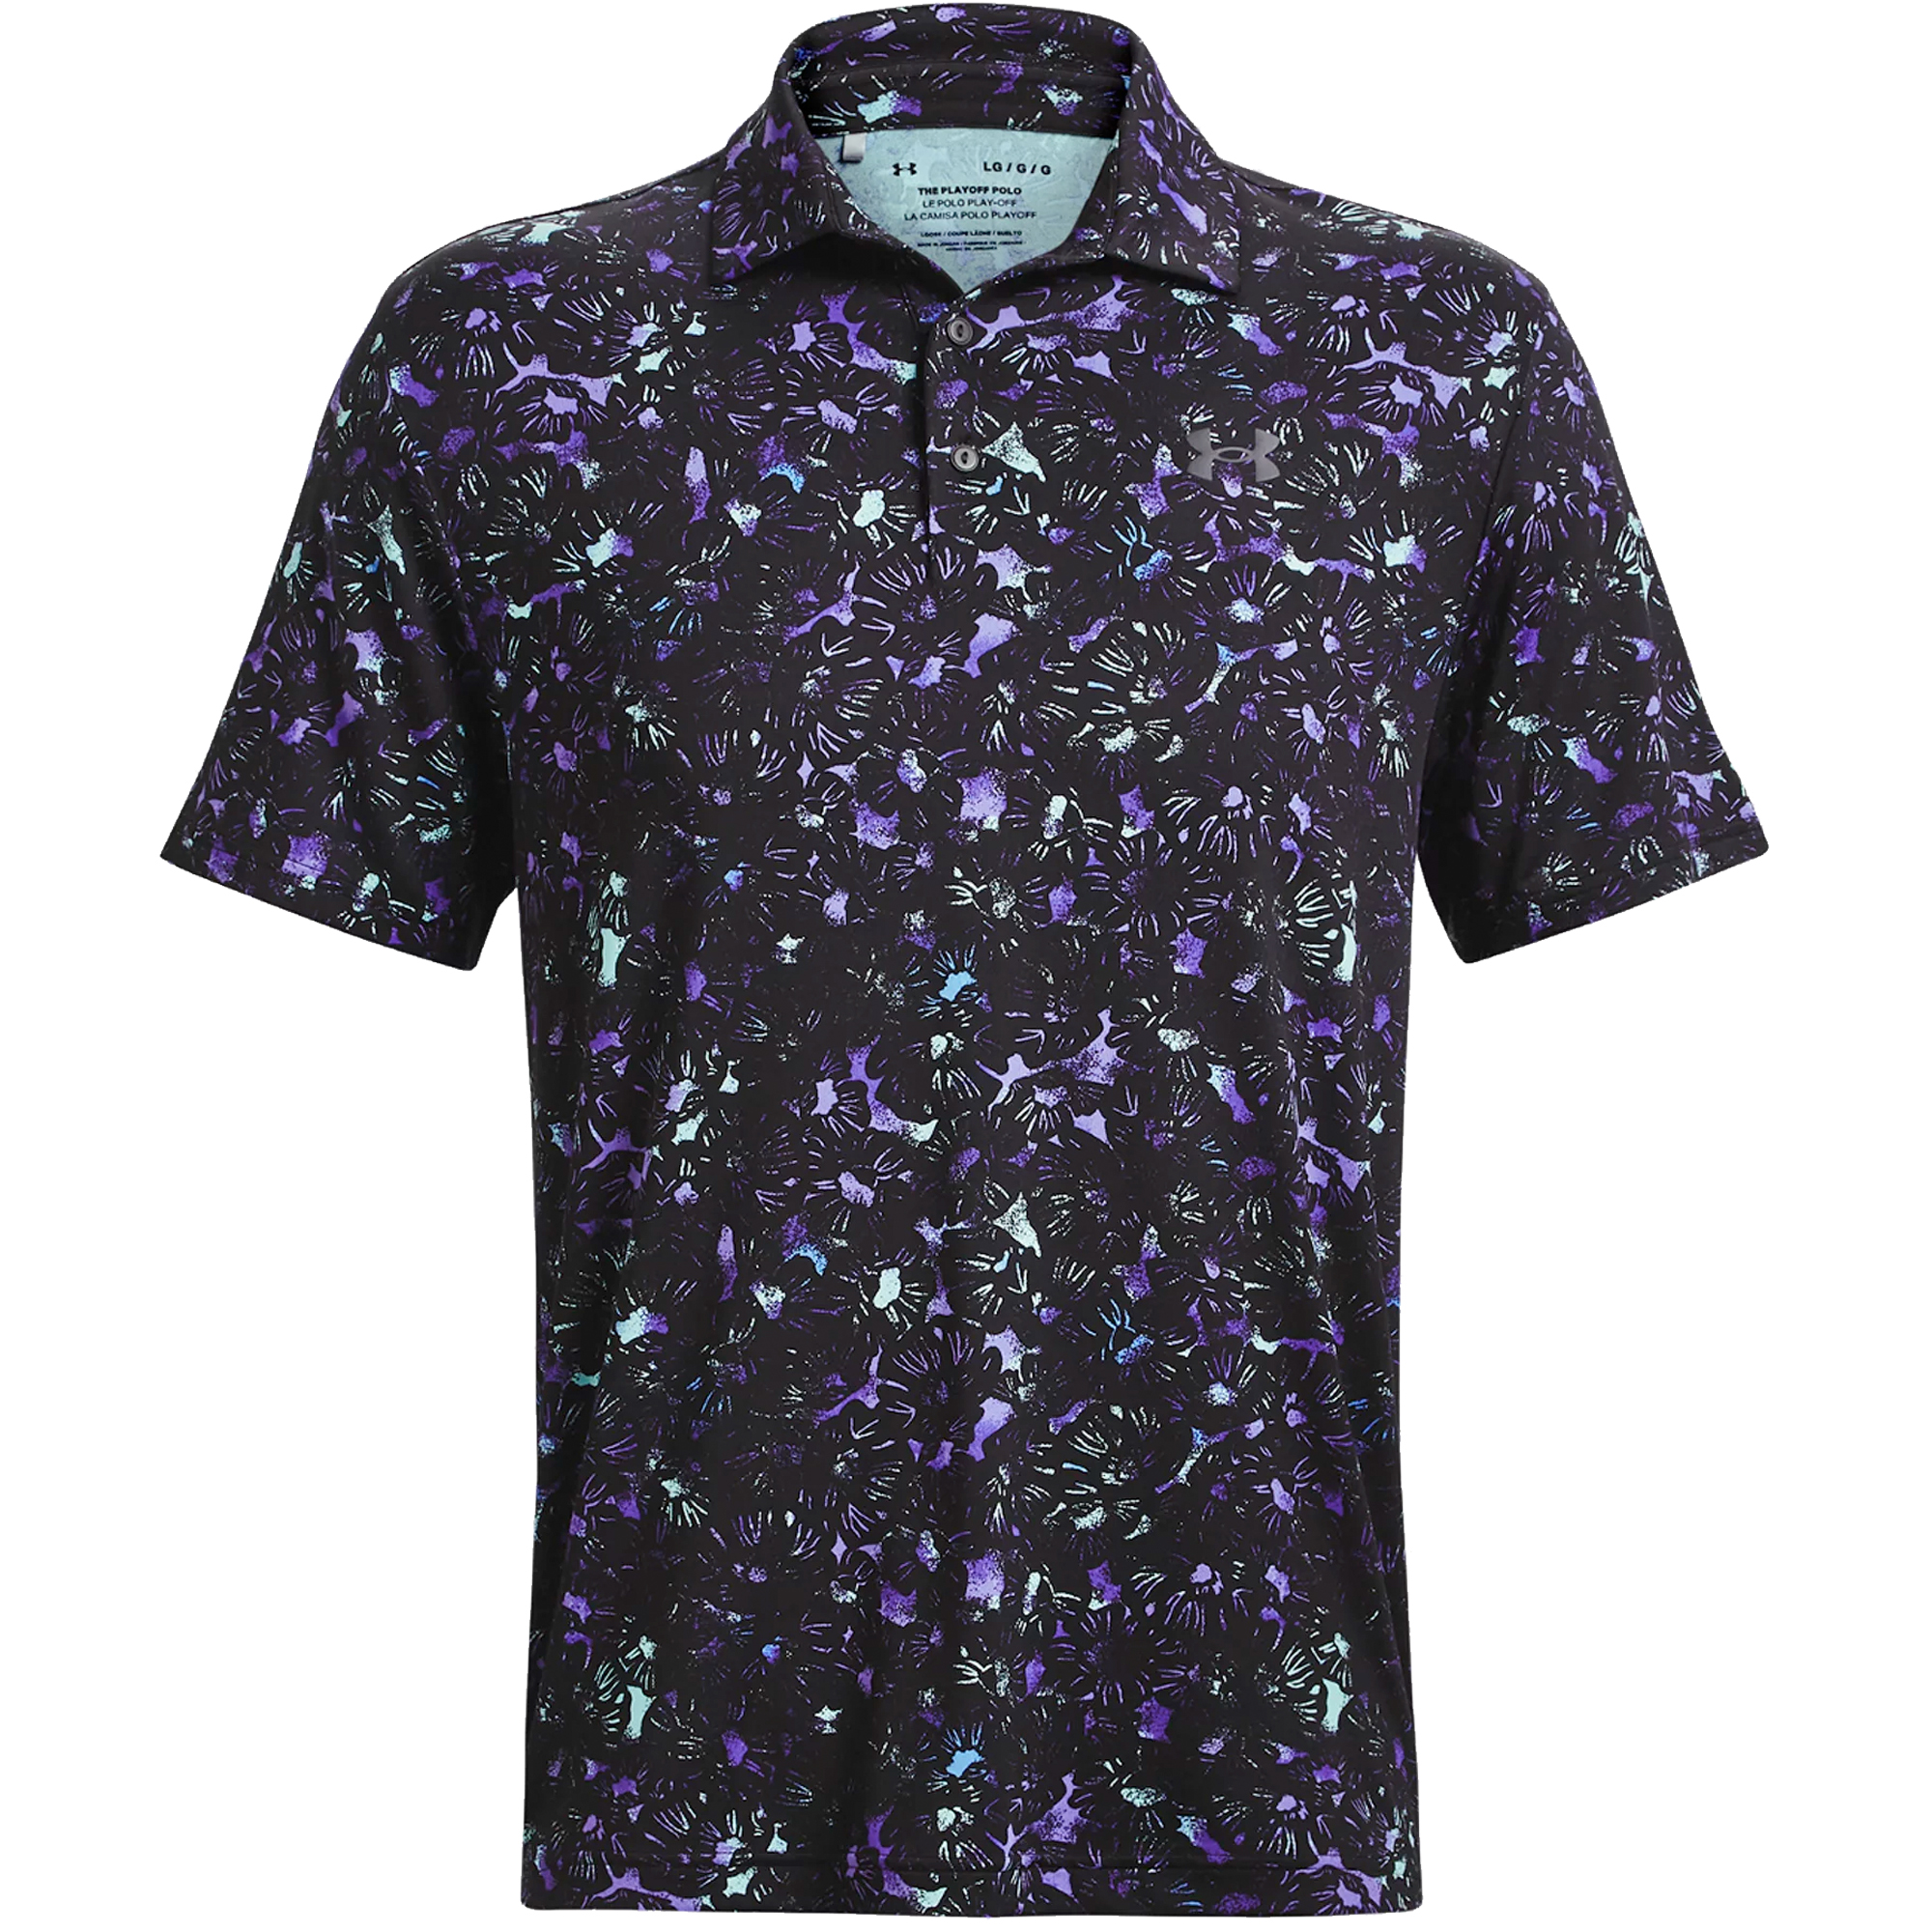 Under Armour Mens Playoff 3.0 Printed Golf Polo Shirt  - Black/Neo Turquoise